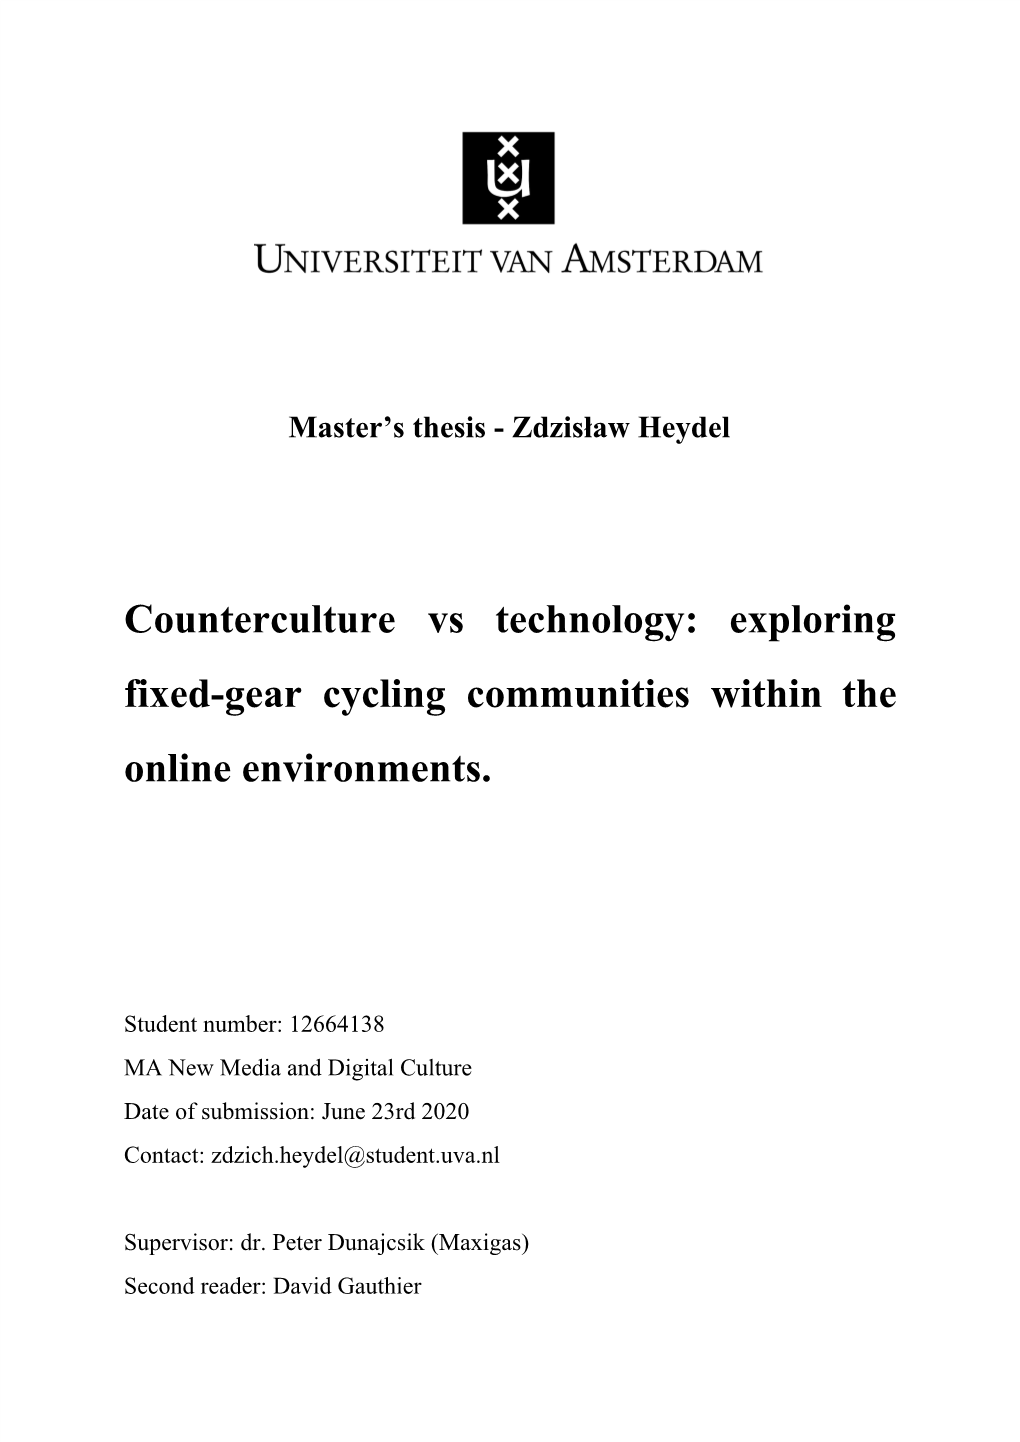 Counterculture Vs Technology: Exploring Fixed-Gear Cycling Communities Within the Online Environments